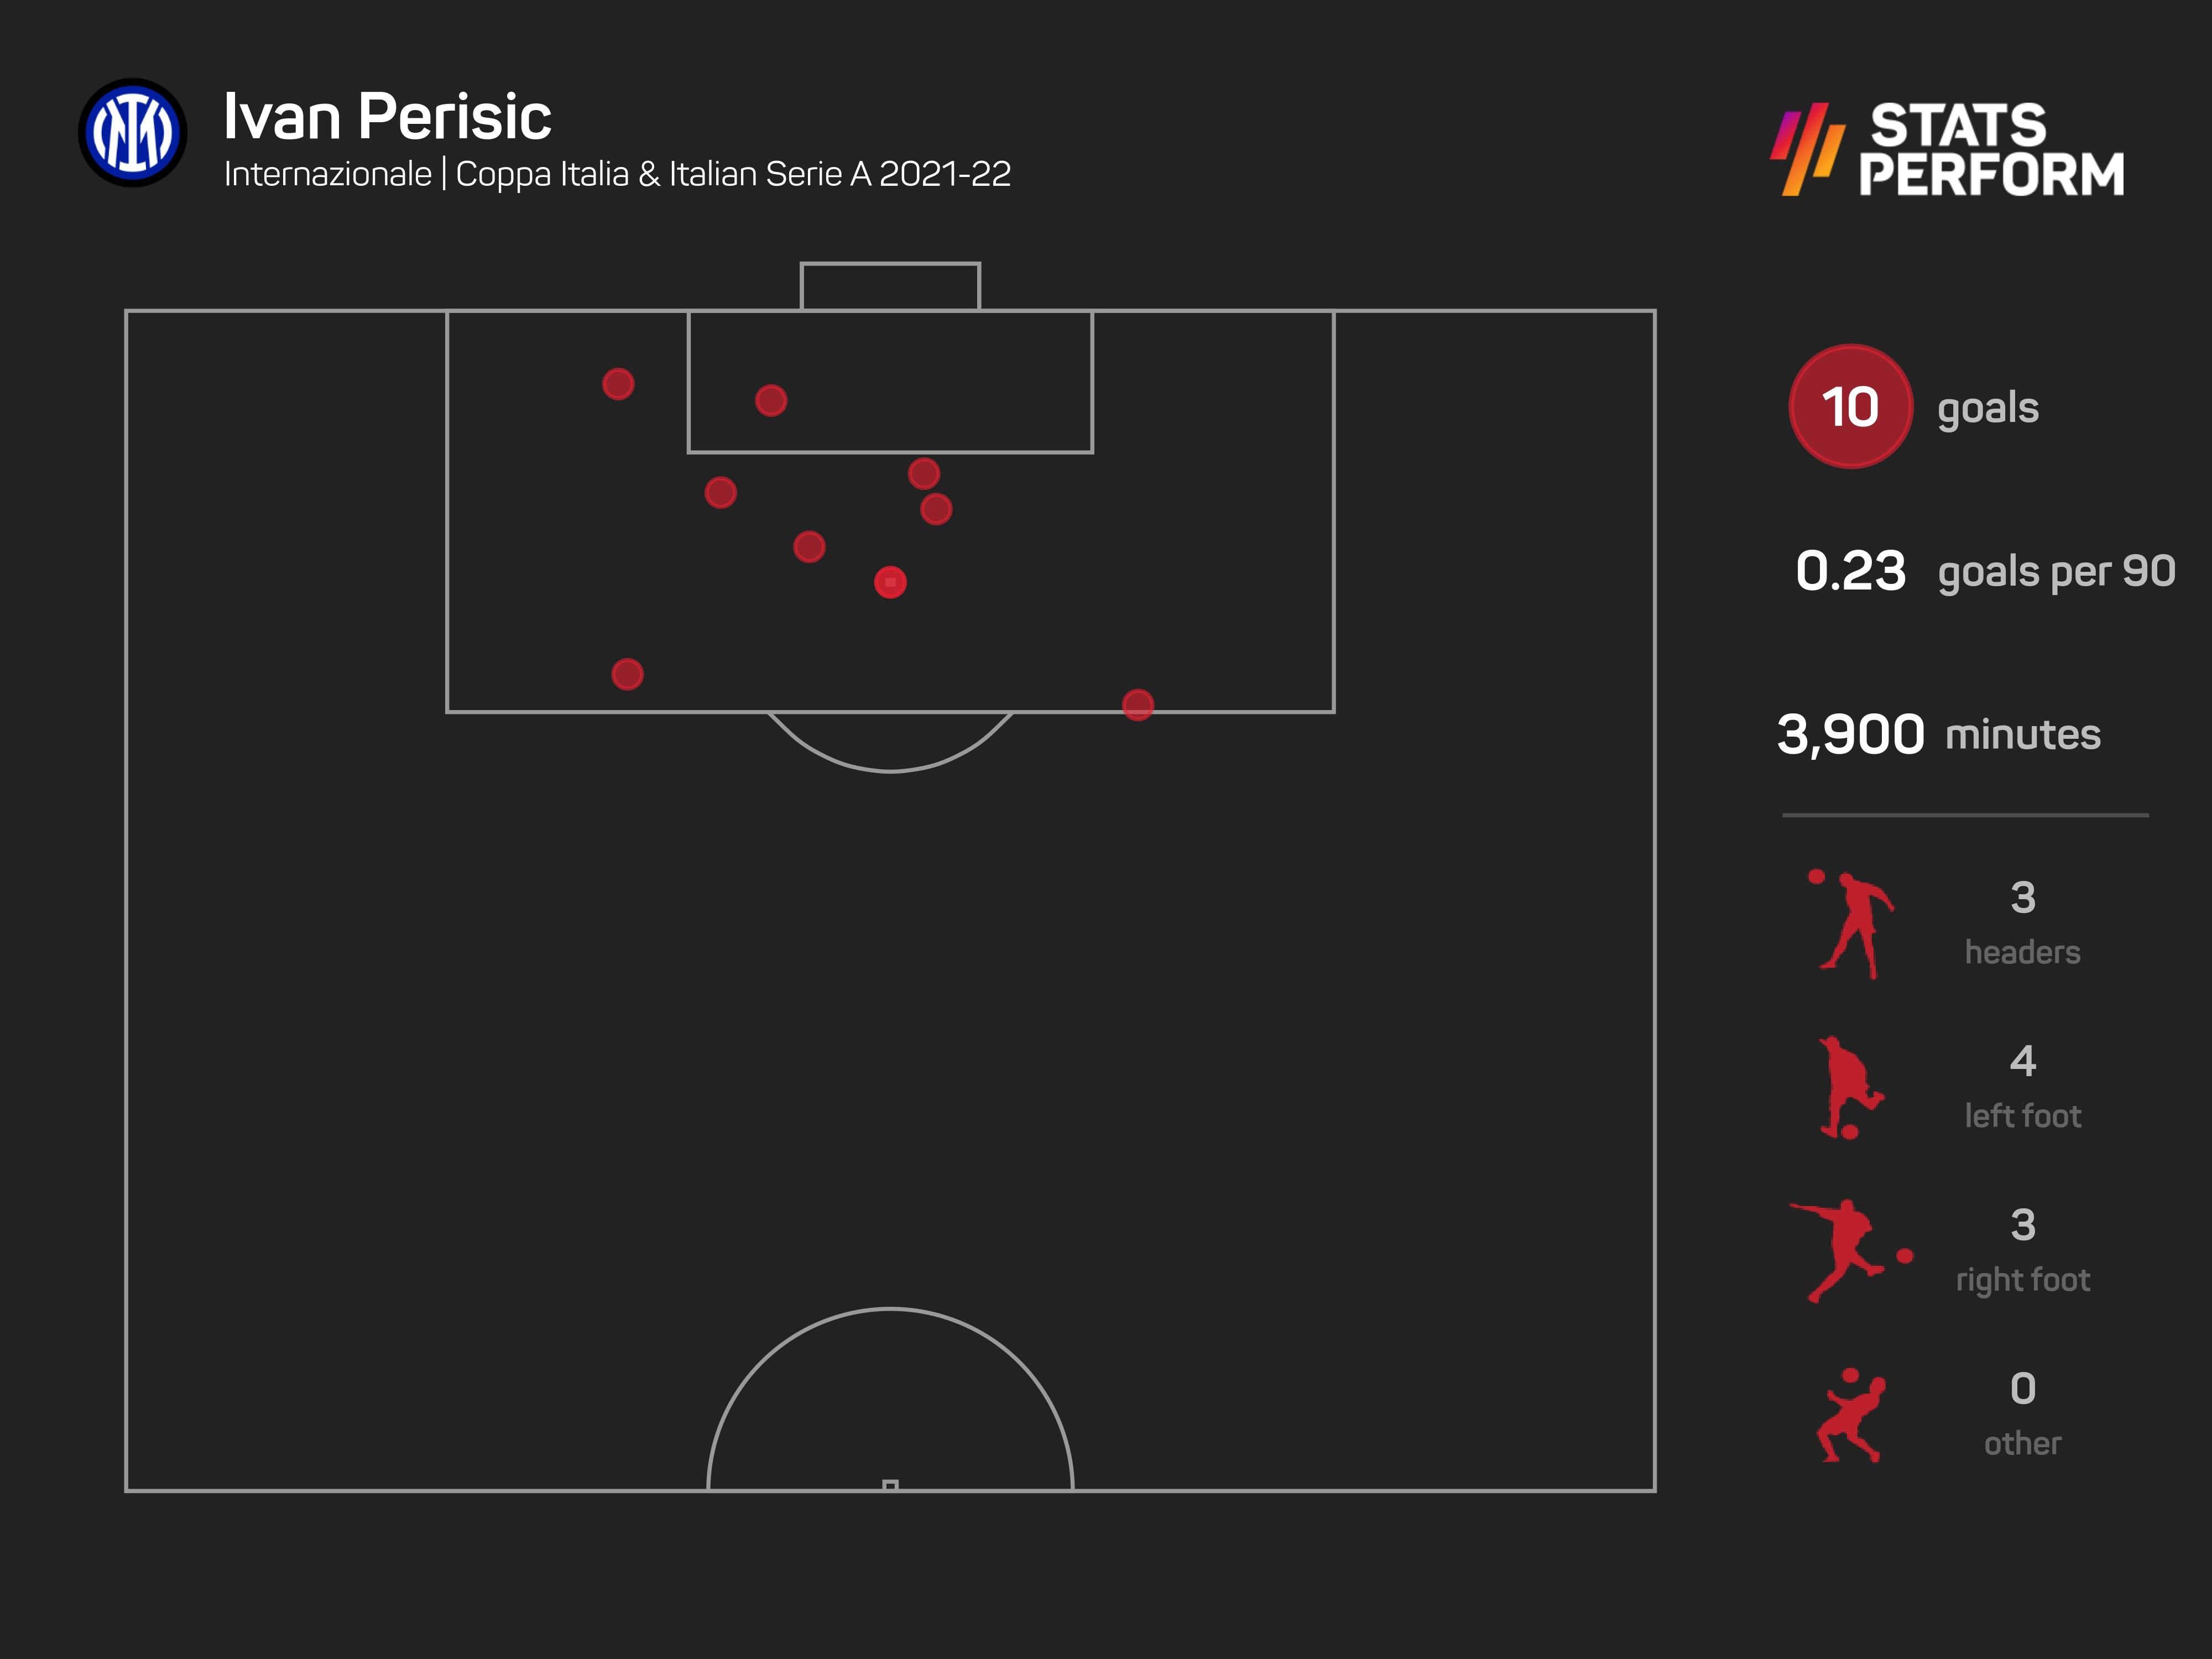 Ivan Perisic scored 10 goals across all competitions for Inter Milan in 2021-22